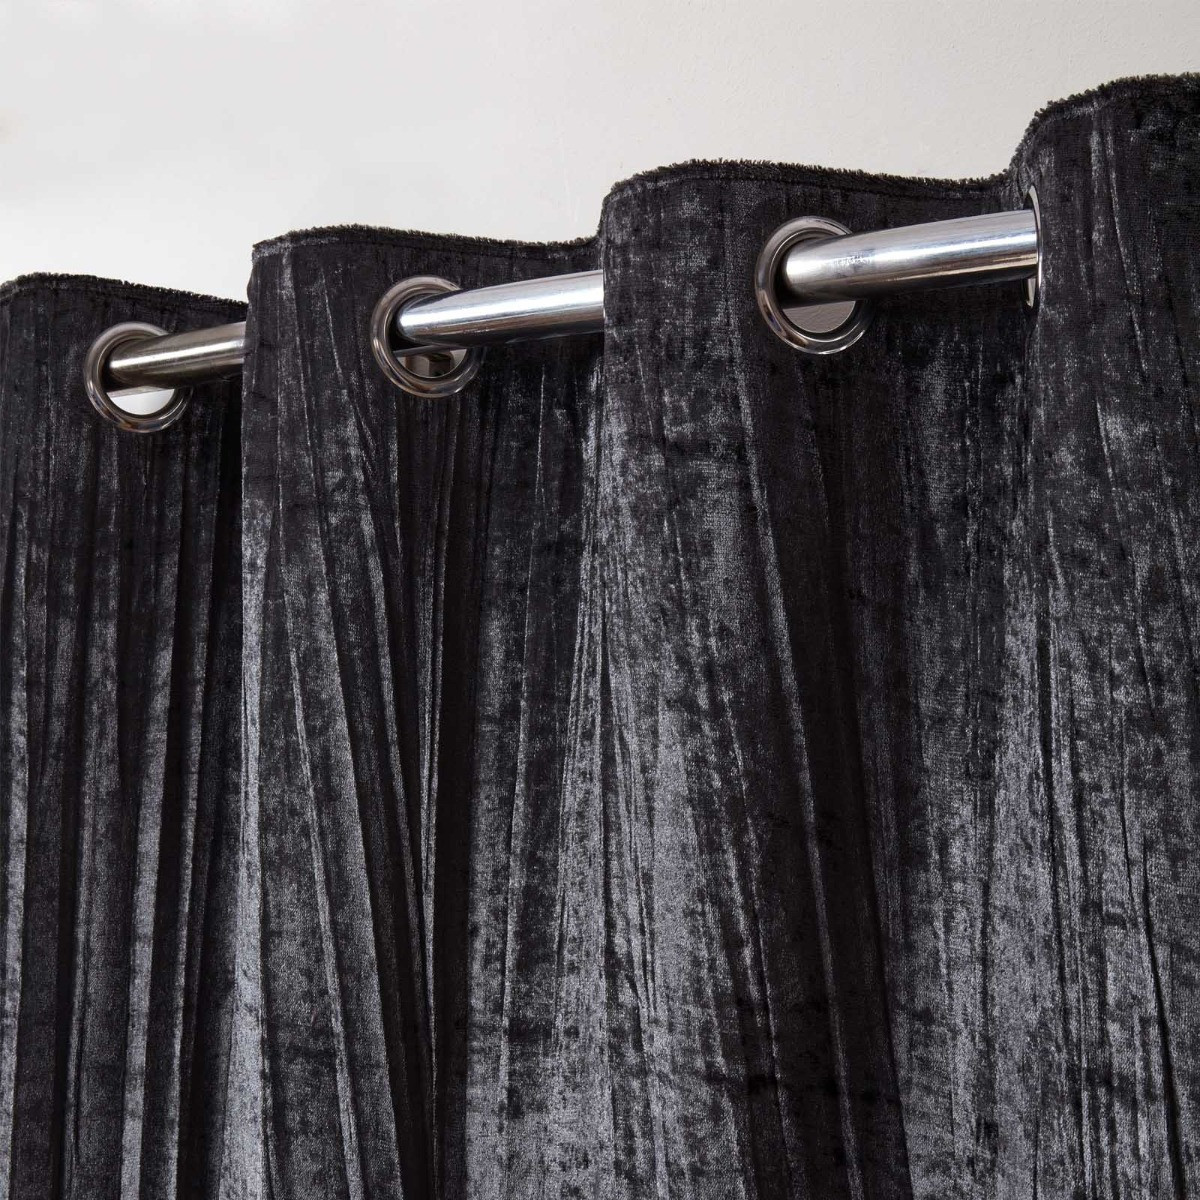 Sienna Home Valencia Crinkle Crushed Velvet Eyelet Curtains - Charcoal Grey>